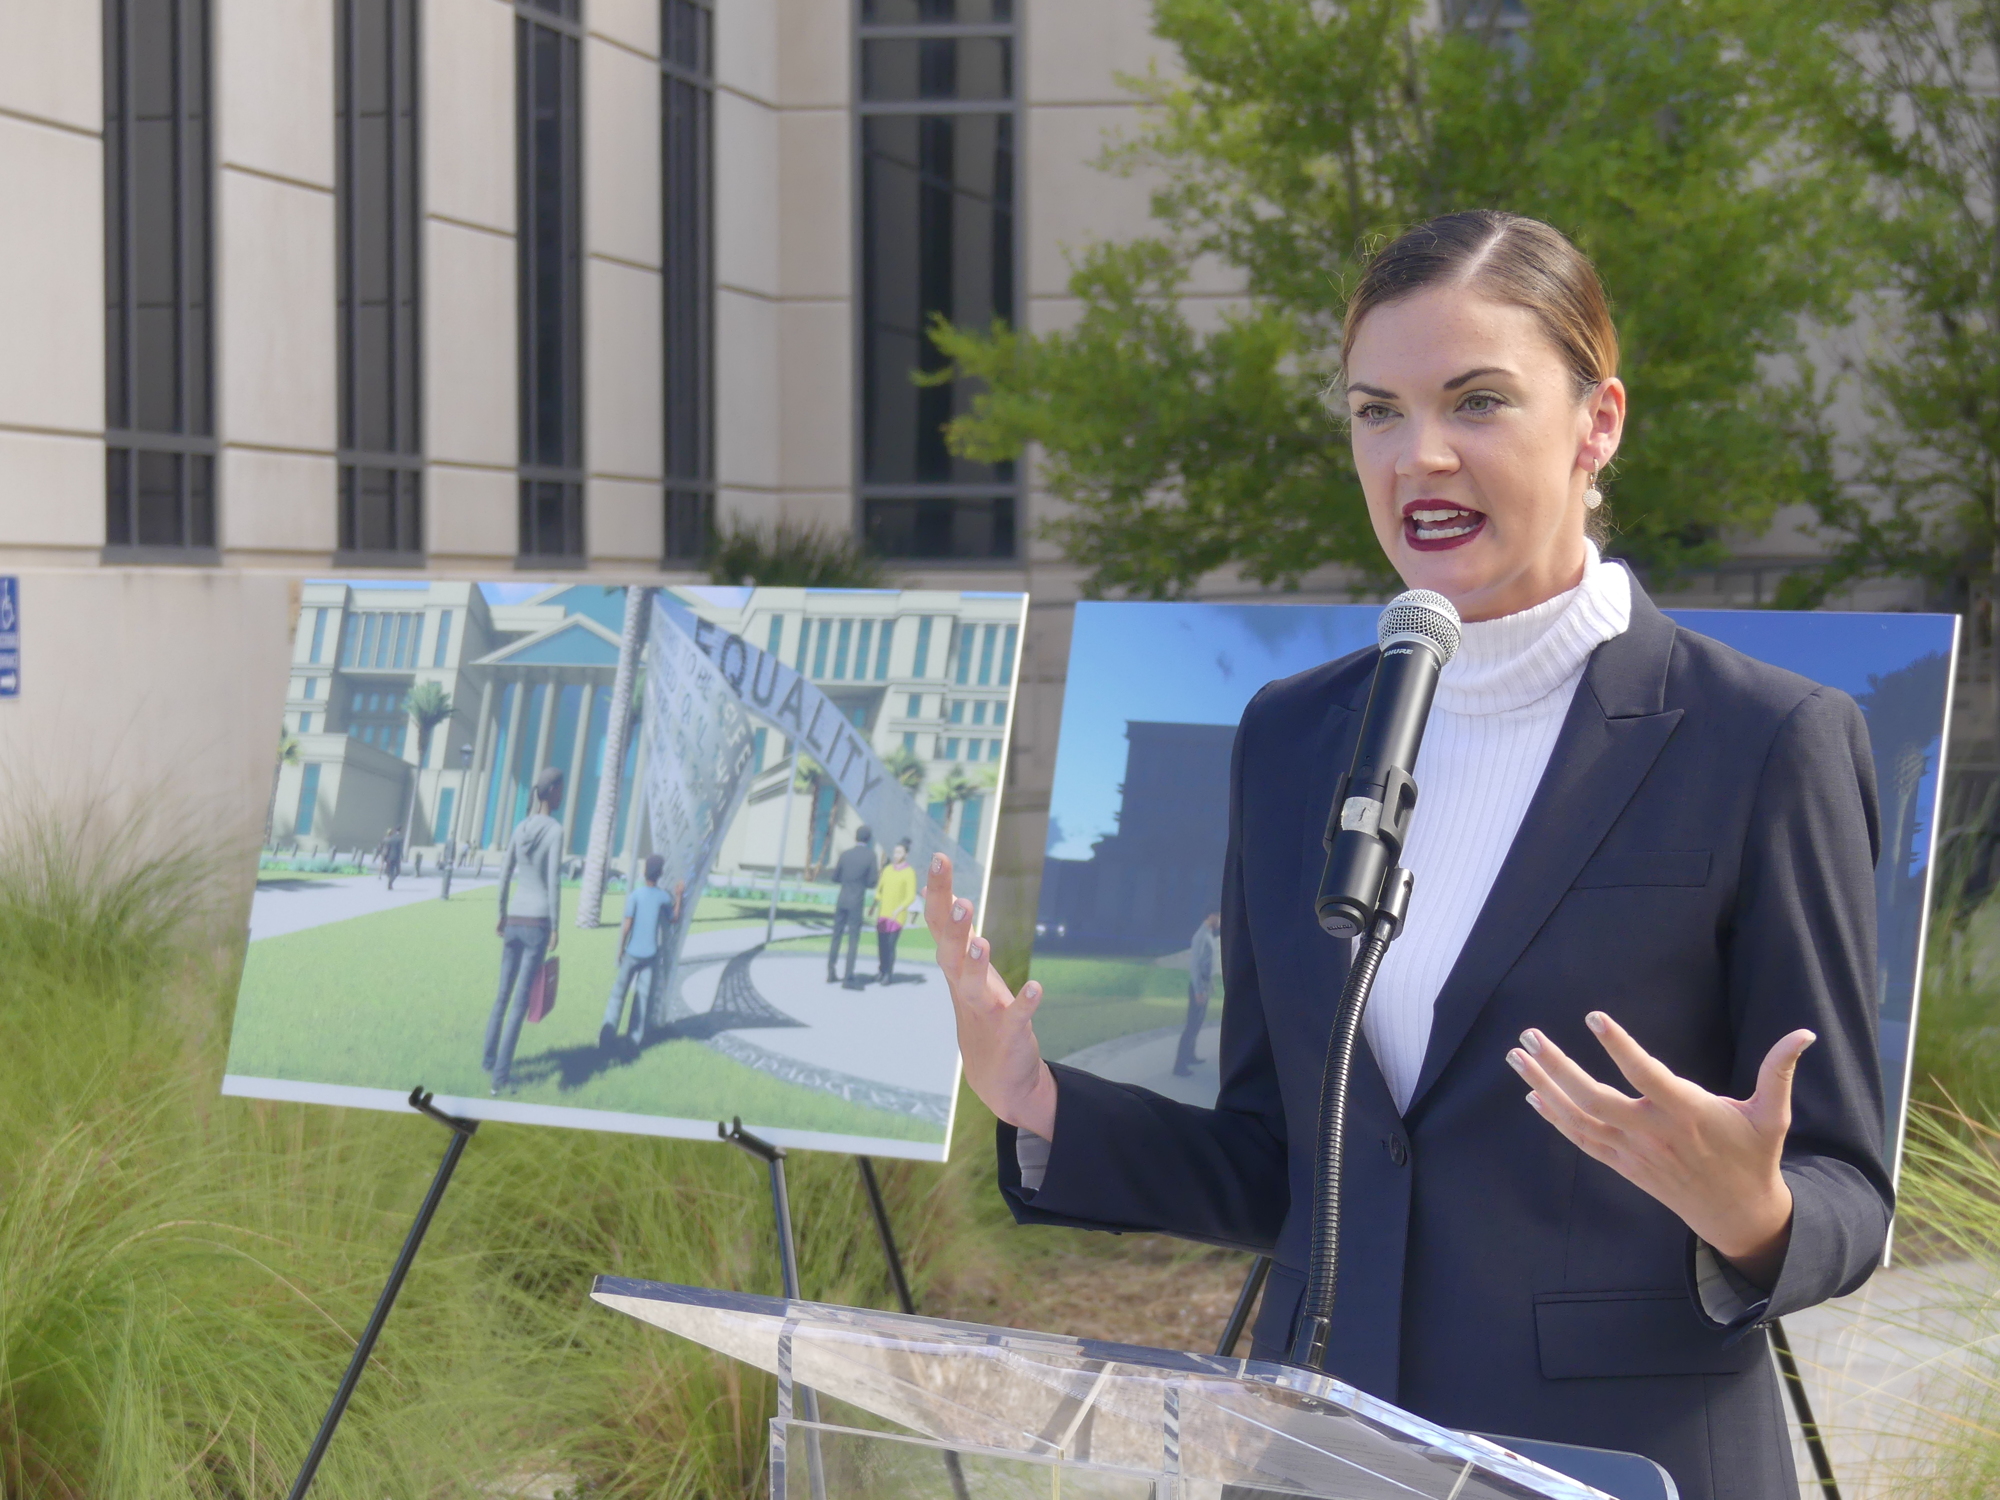 Diana Donovan, executive director of the Cultural Council of Greater Jacksonville, unveiled the design for the Duval County Courthouse Art in Public Places installation at a news conference June 1 at the courthouse.